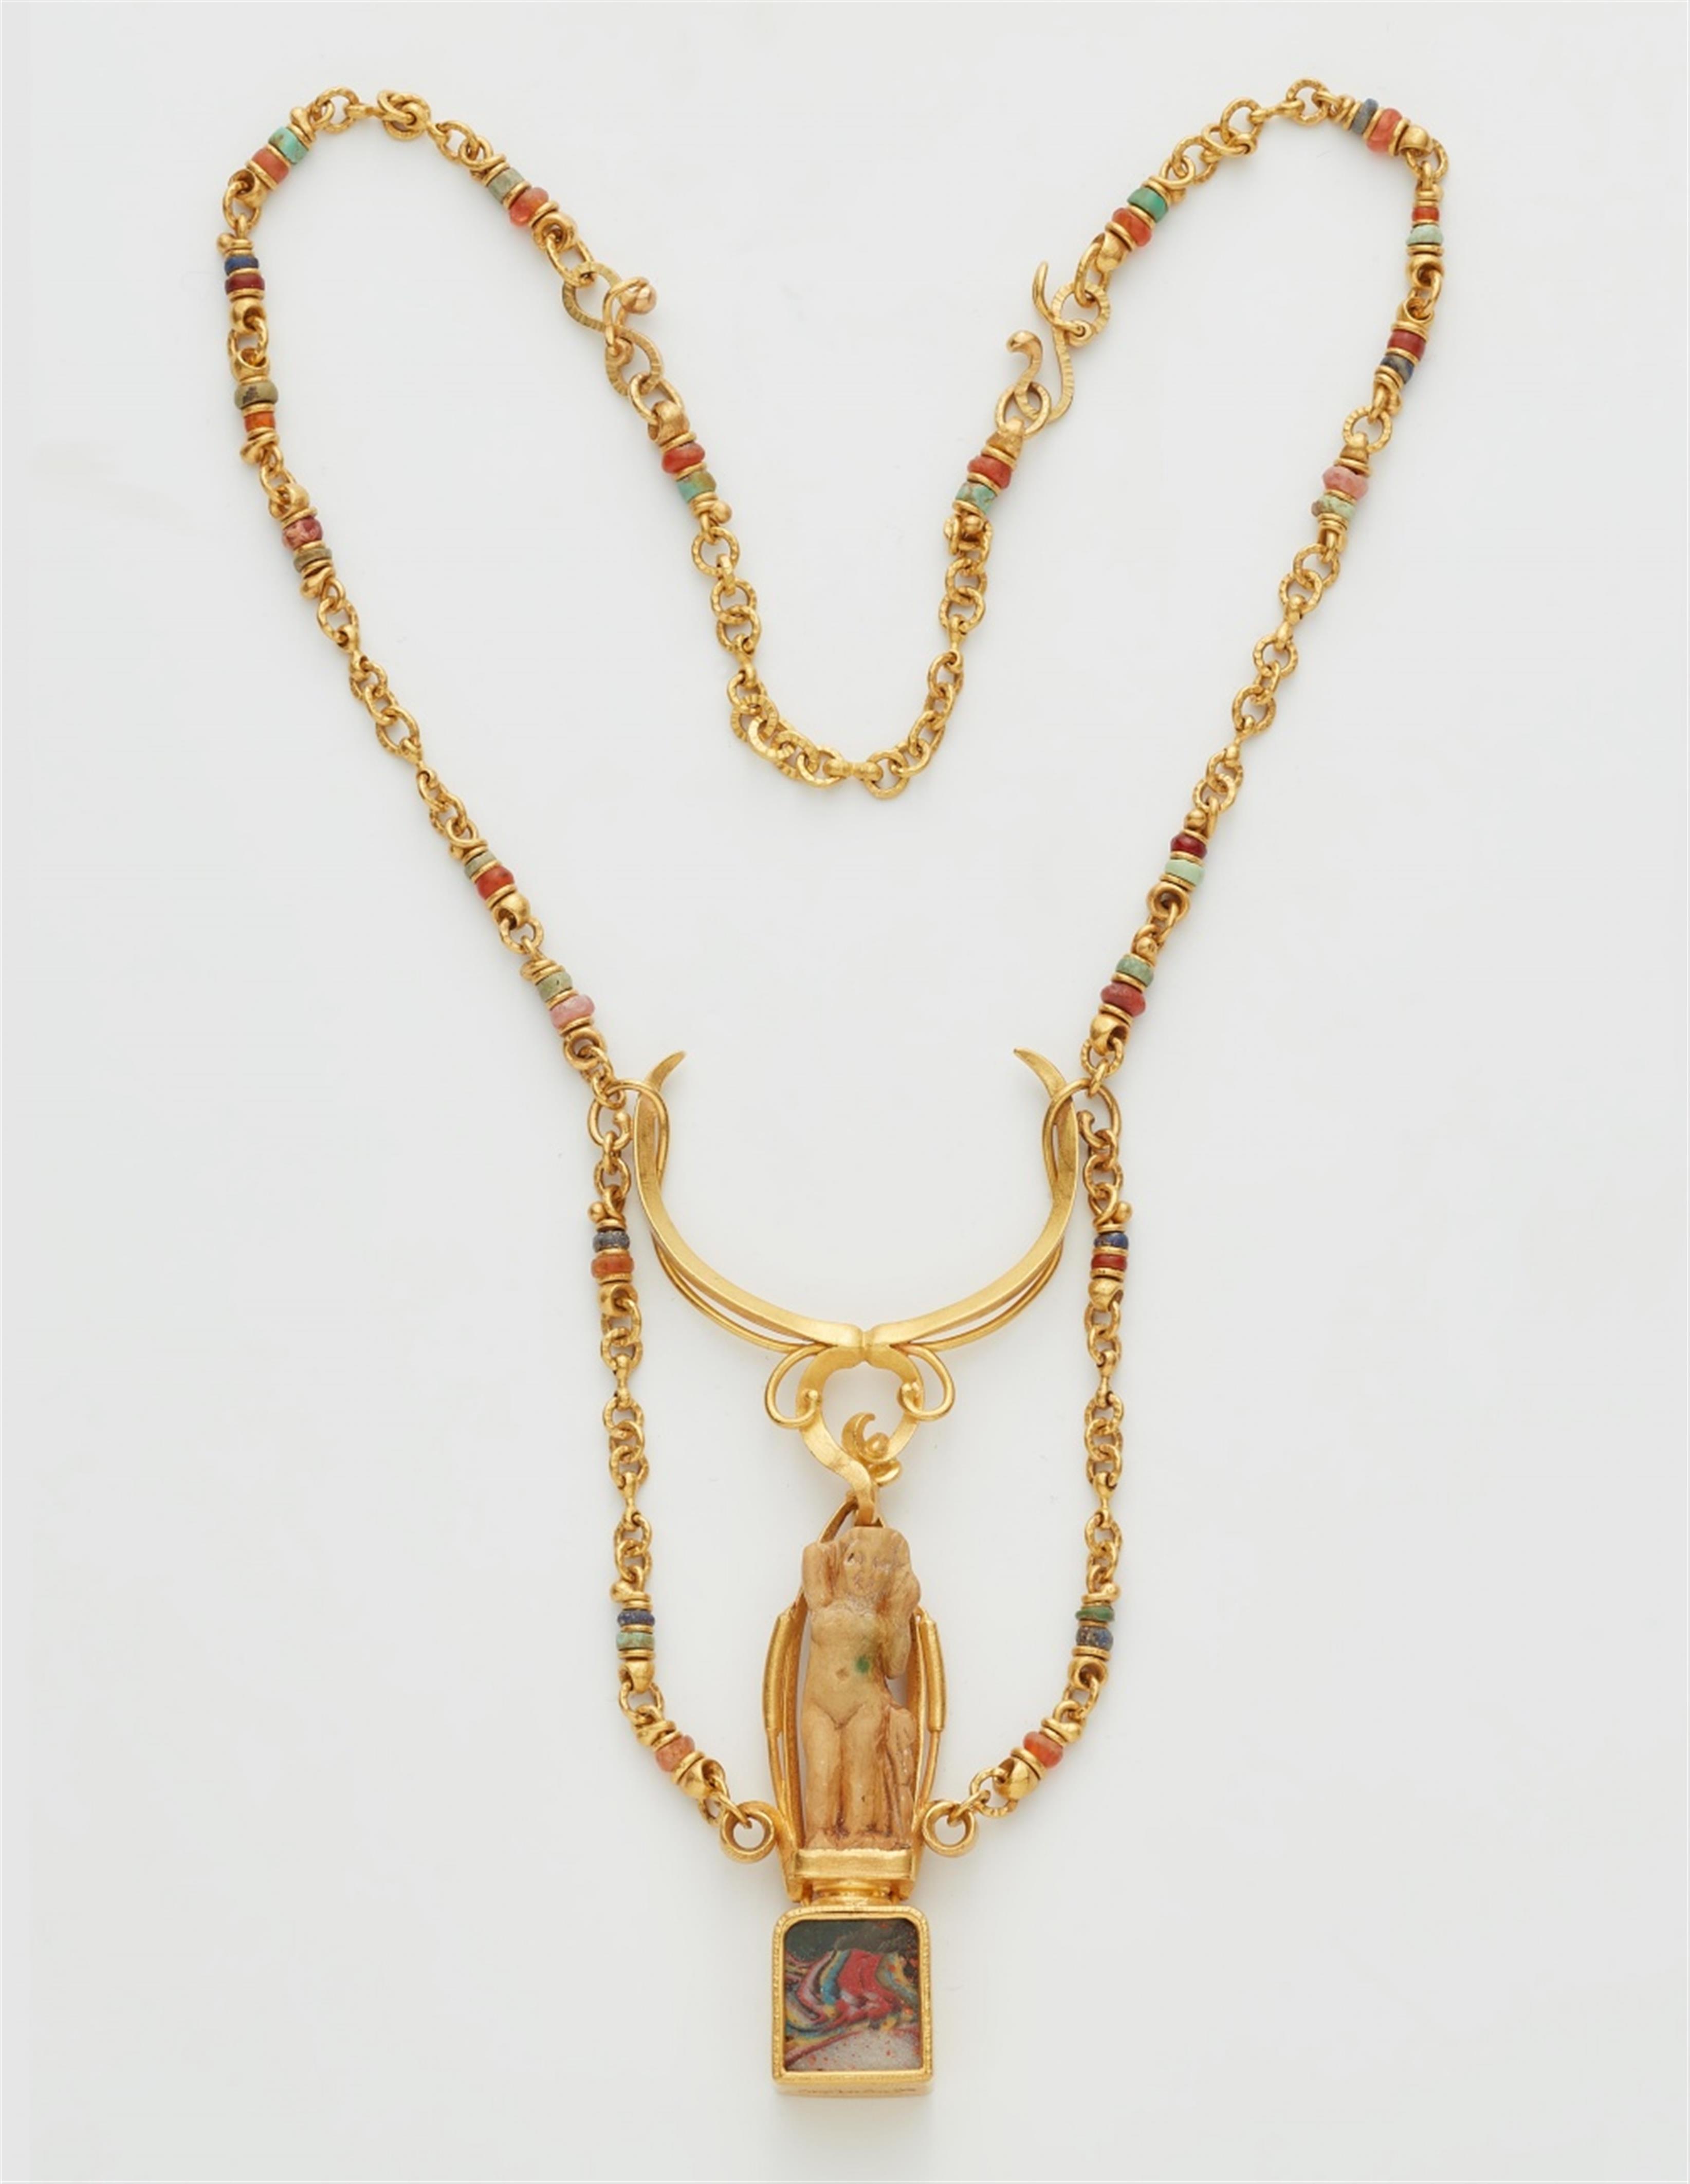 A 22k gold necklace with an Egyptian amulet - 